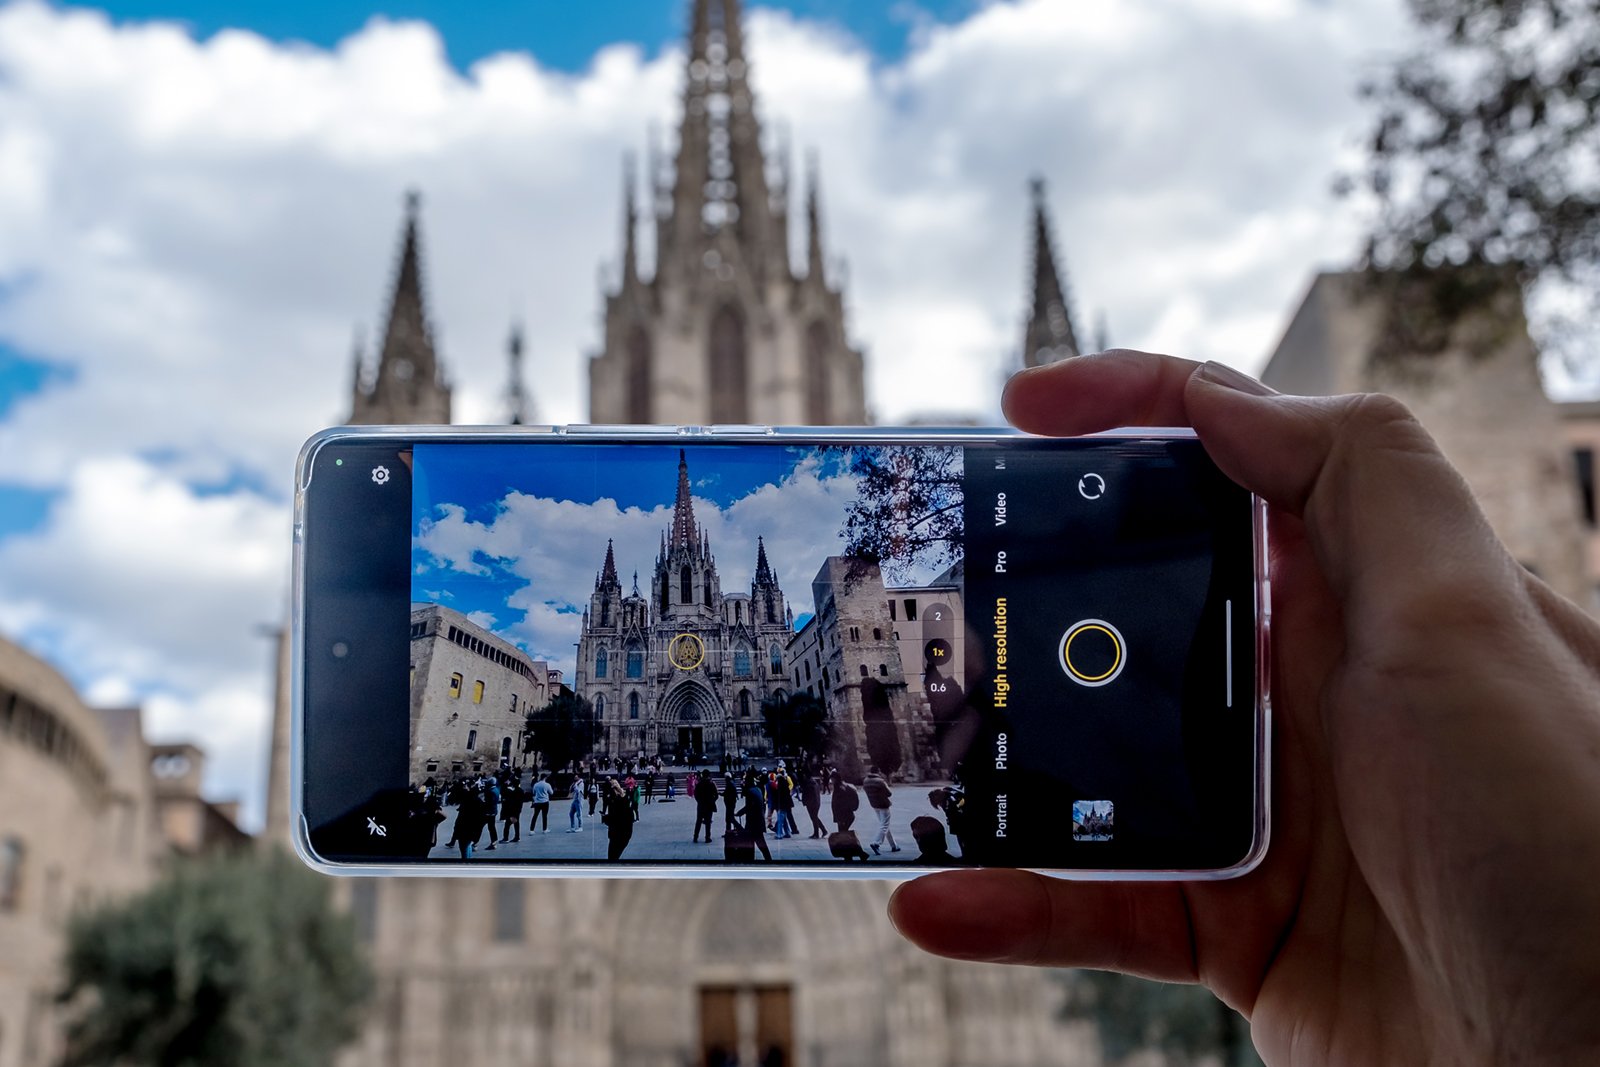 A hand holding a smartphone capturing a photo of a bustling square in front of a grand gothic cathedral under a cloudy sky. the phone screen displays the cathedral image clearly.